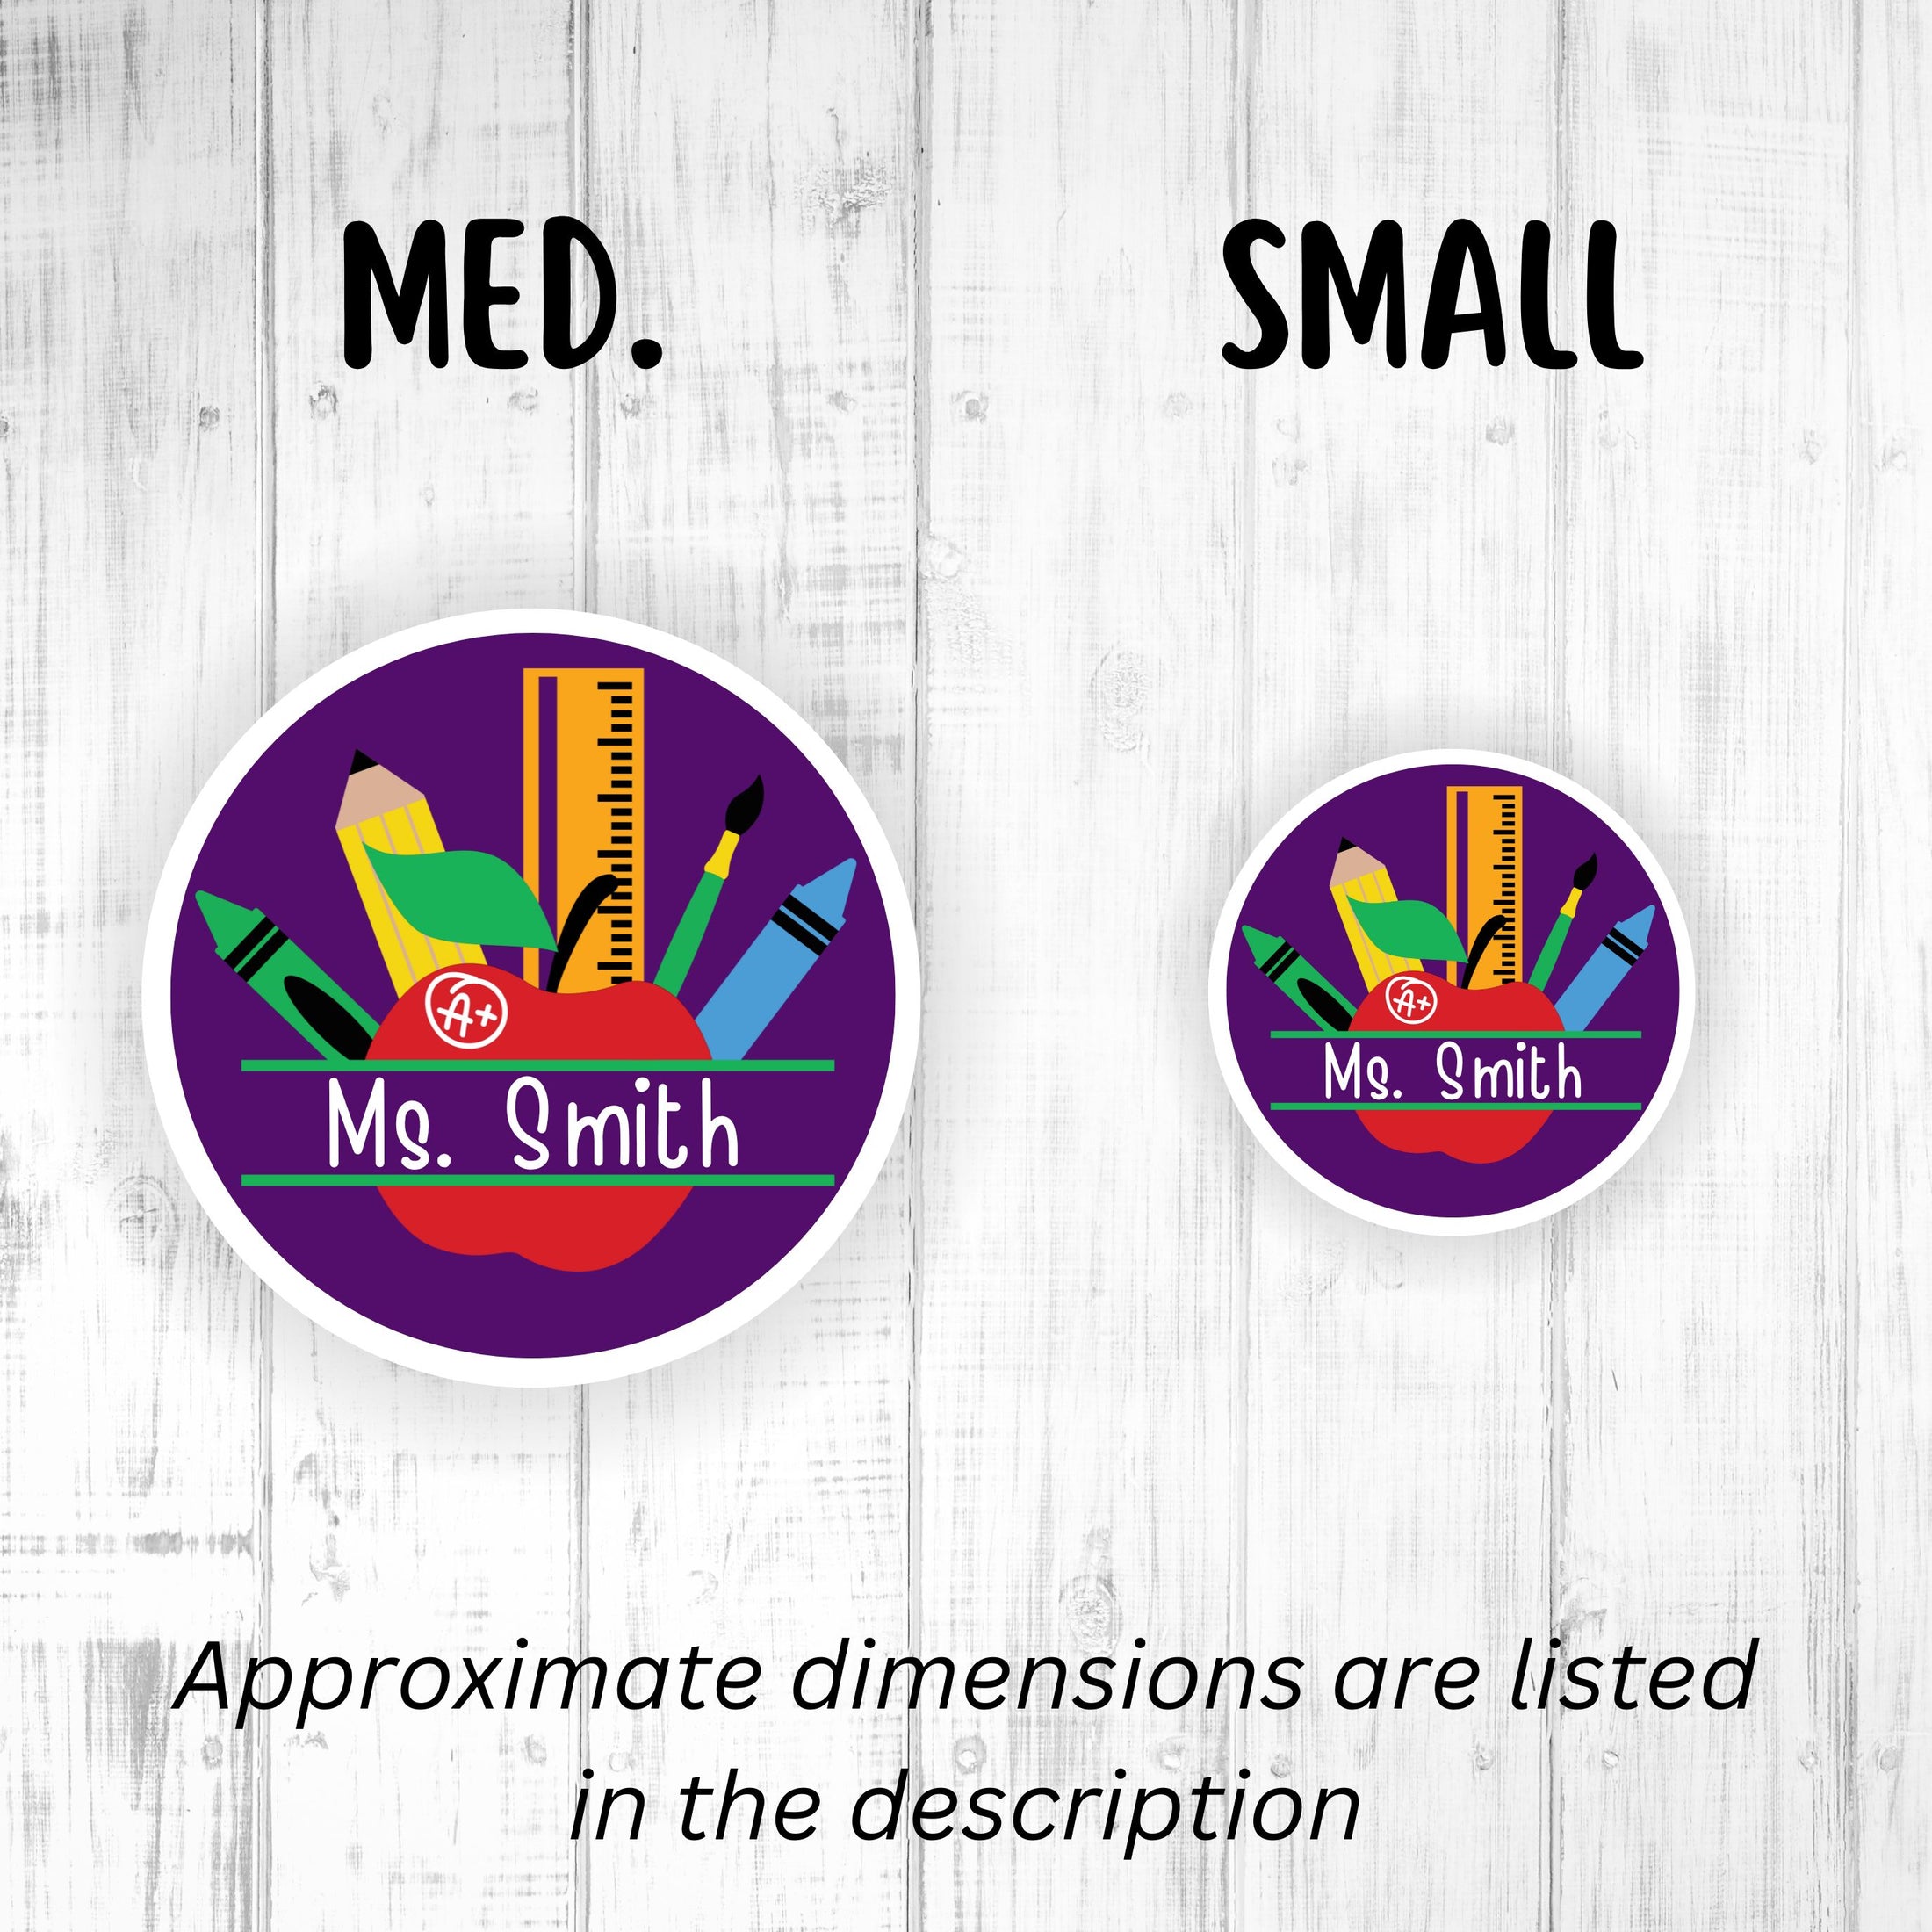 This image shows medium and small personalized school stickers next to each other as a size comparison.